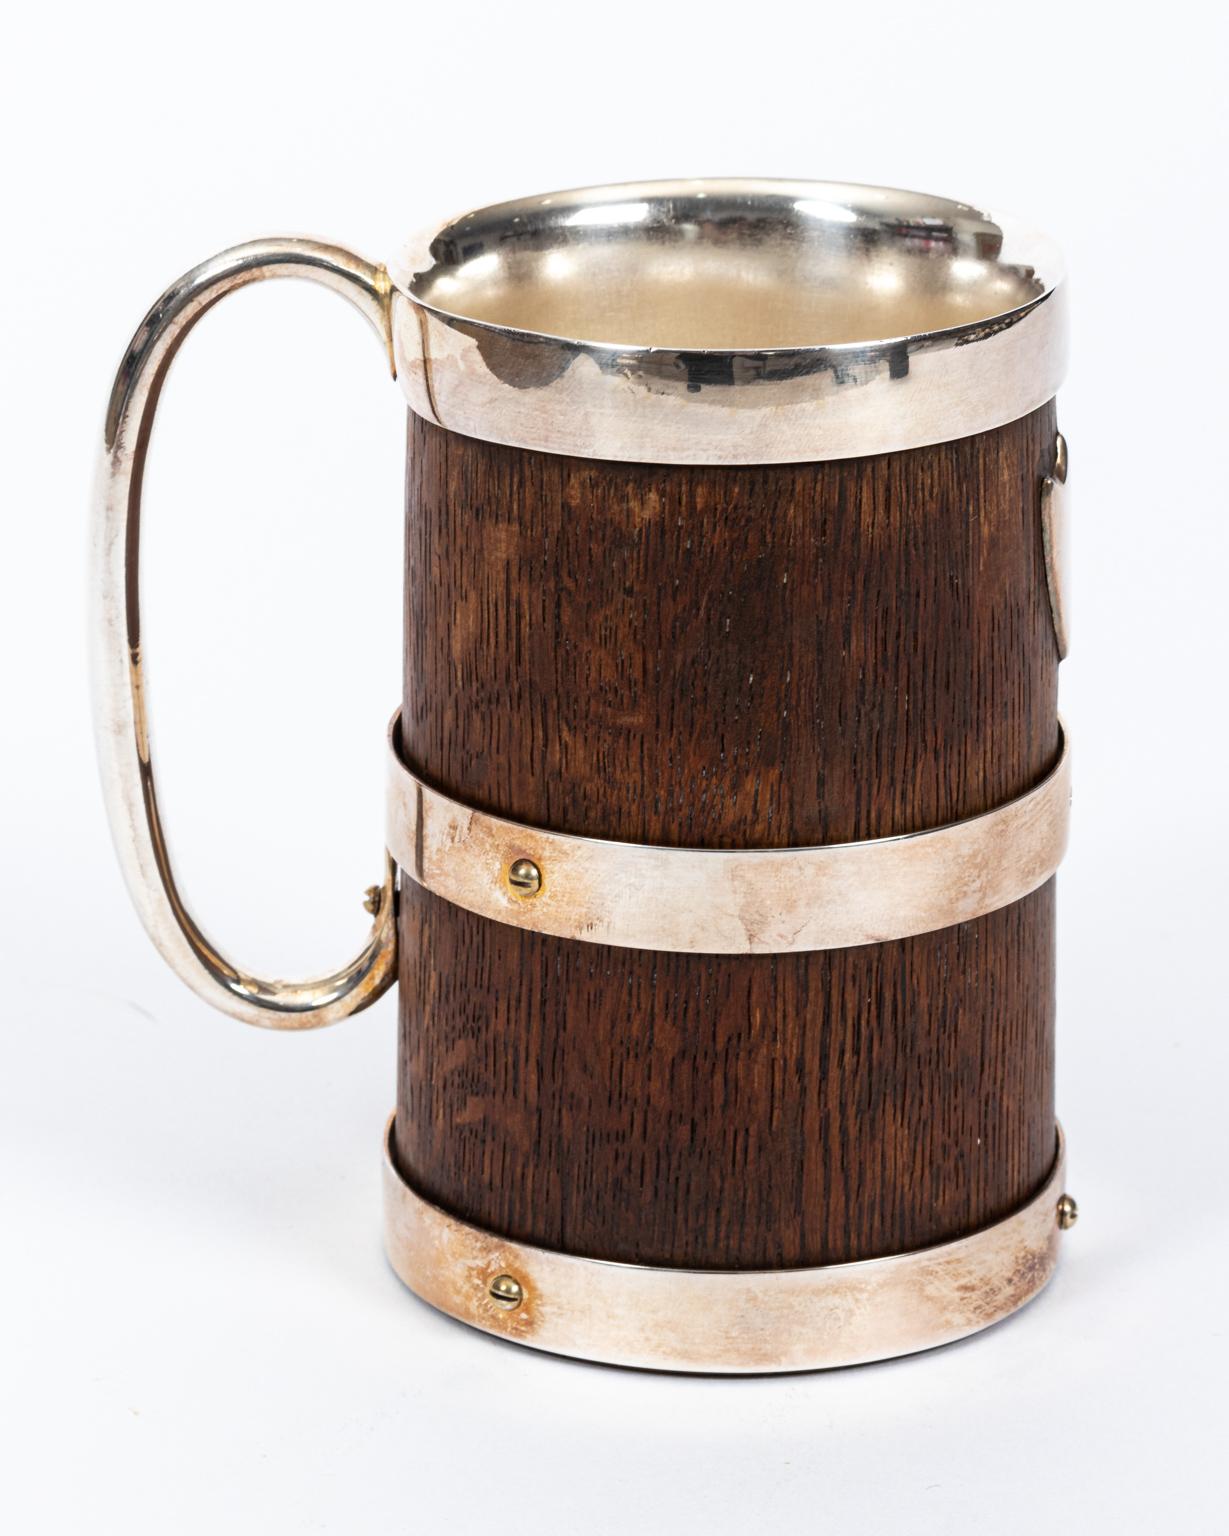 Small English wood and silver plate mug with handle and shield motif. Please note of wear consistent with age including patina and minor finish loss to the wood.